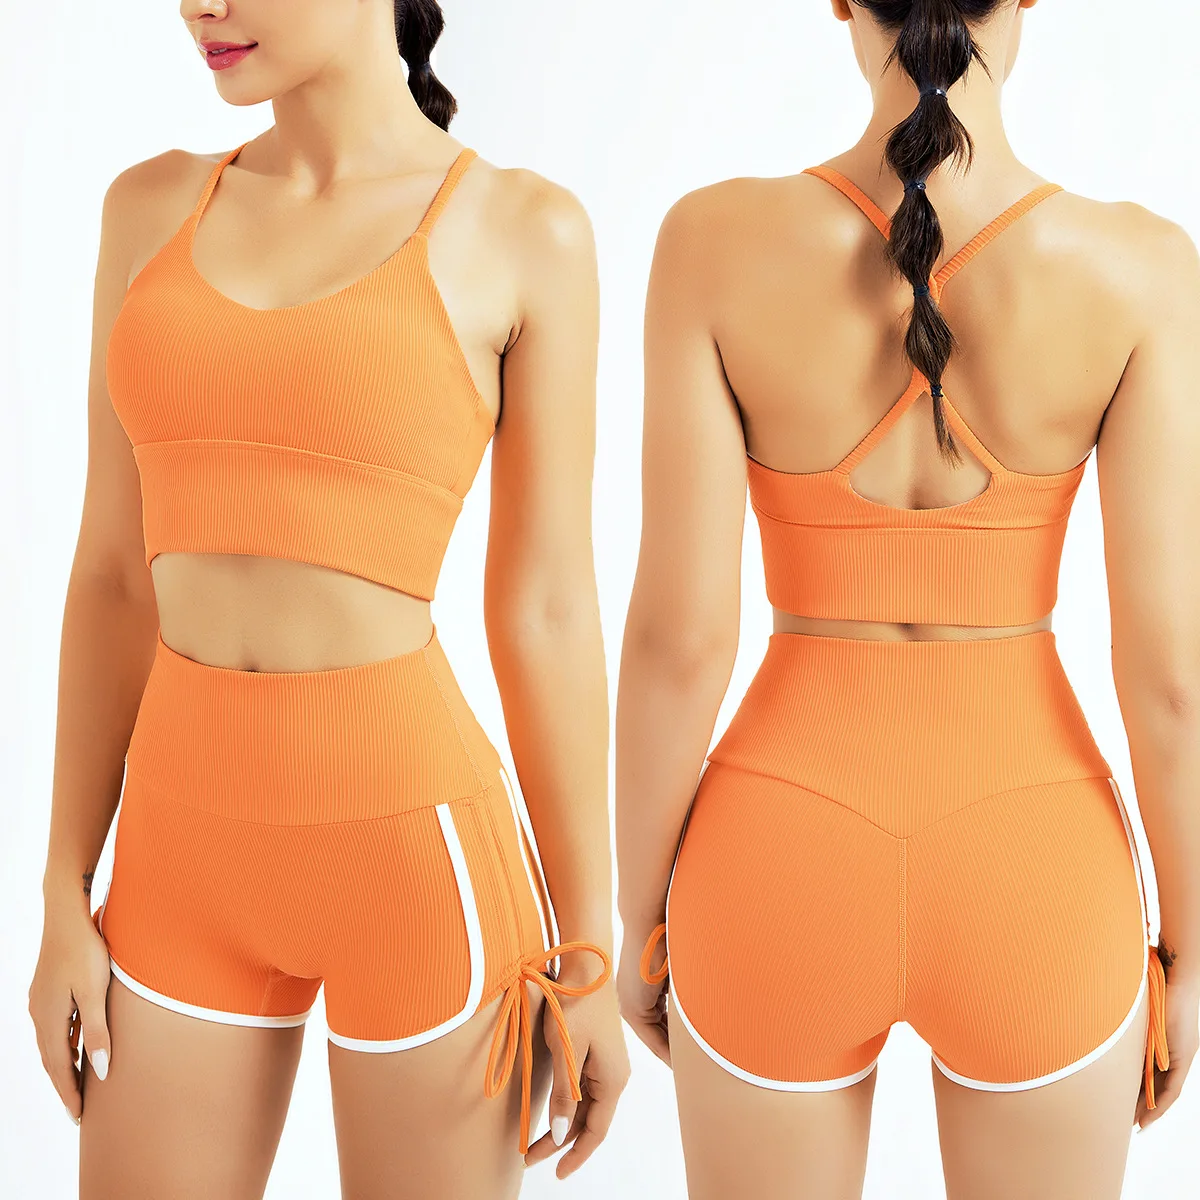 

Women Shorts Yoga Set Wear Suspenders Sportswear Strap Shorts Fitness Shorts with Lateral Fold Strap Workout Gym Tracksuits